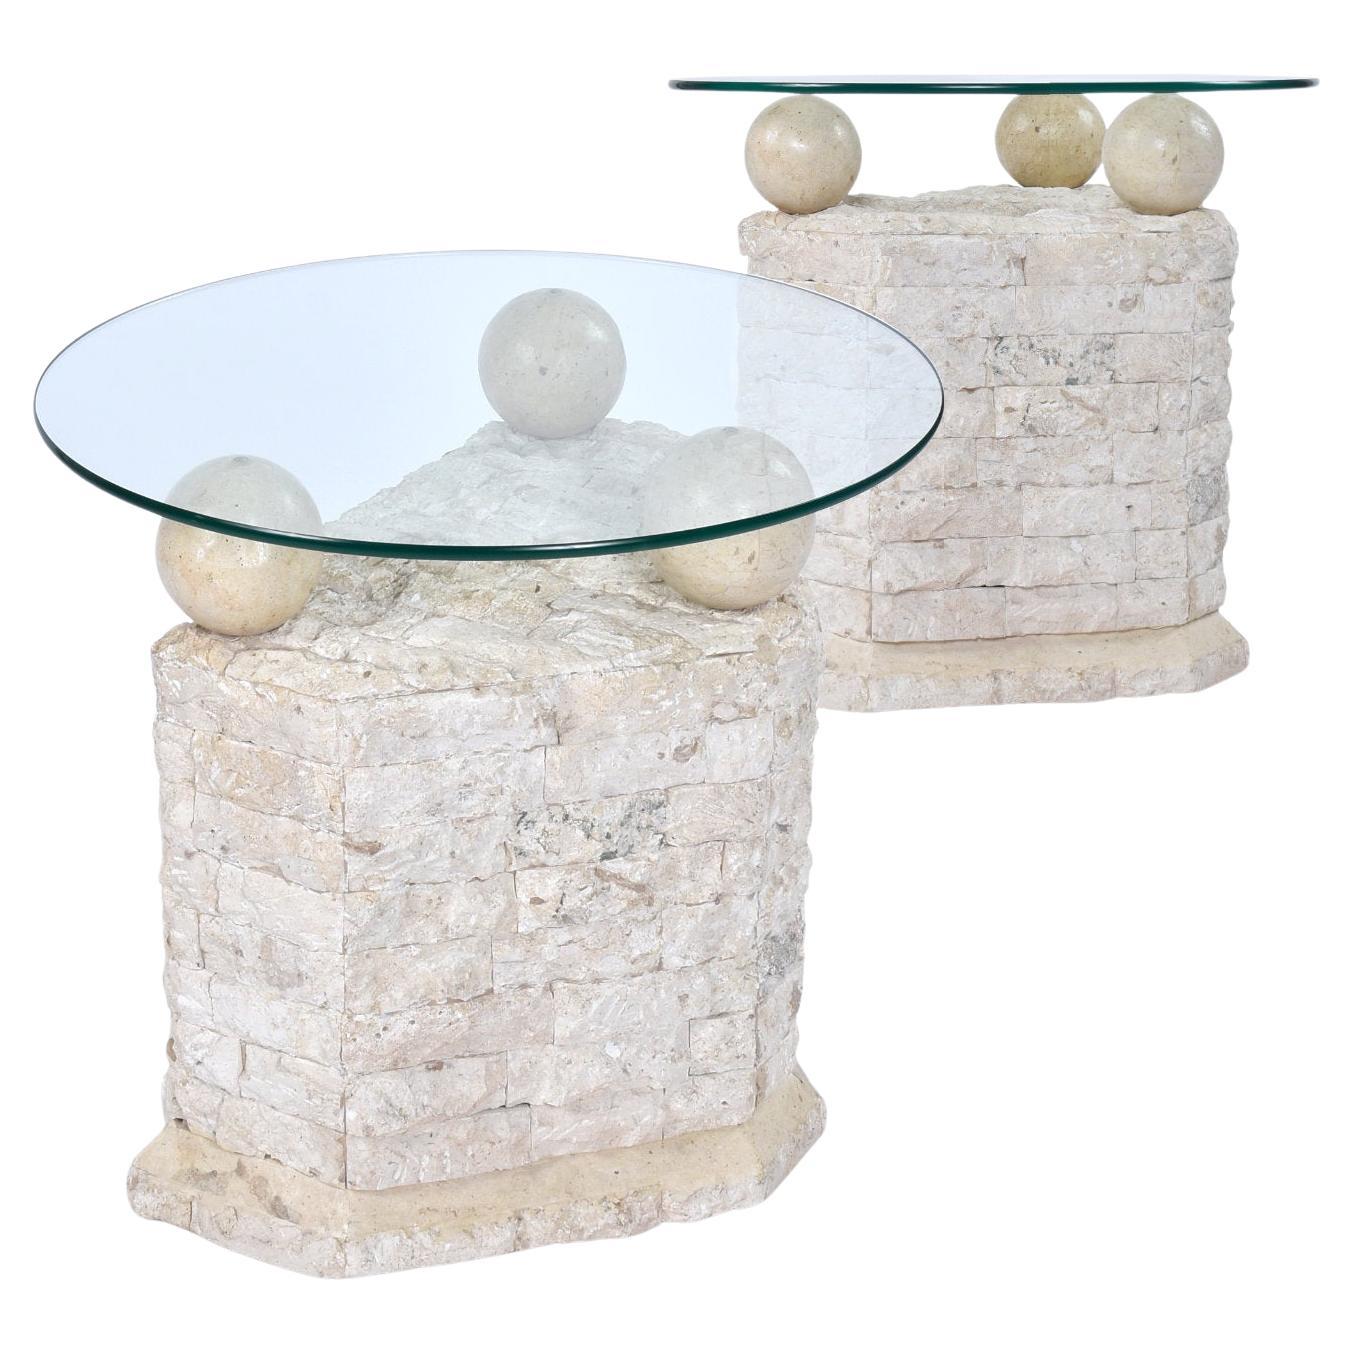 Vintage 1980s Post Modern tessellated Mactan stone side tables or pedestals. These versatile tables are made of Mactan stone, a type of coral. Chunks of stone have been arranged in a staggered brick-like pattern, hence the “tessellated” moniker. A